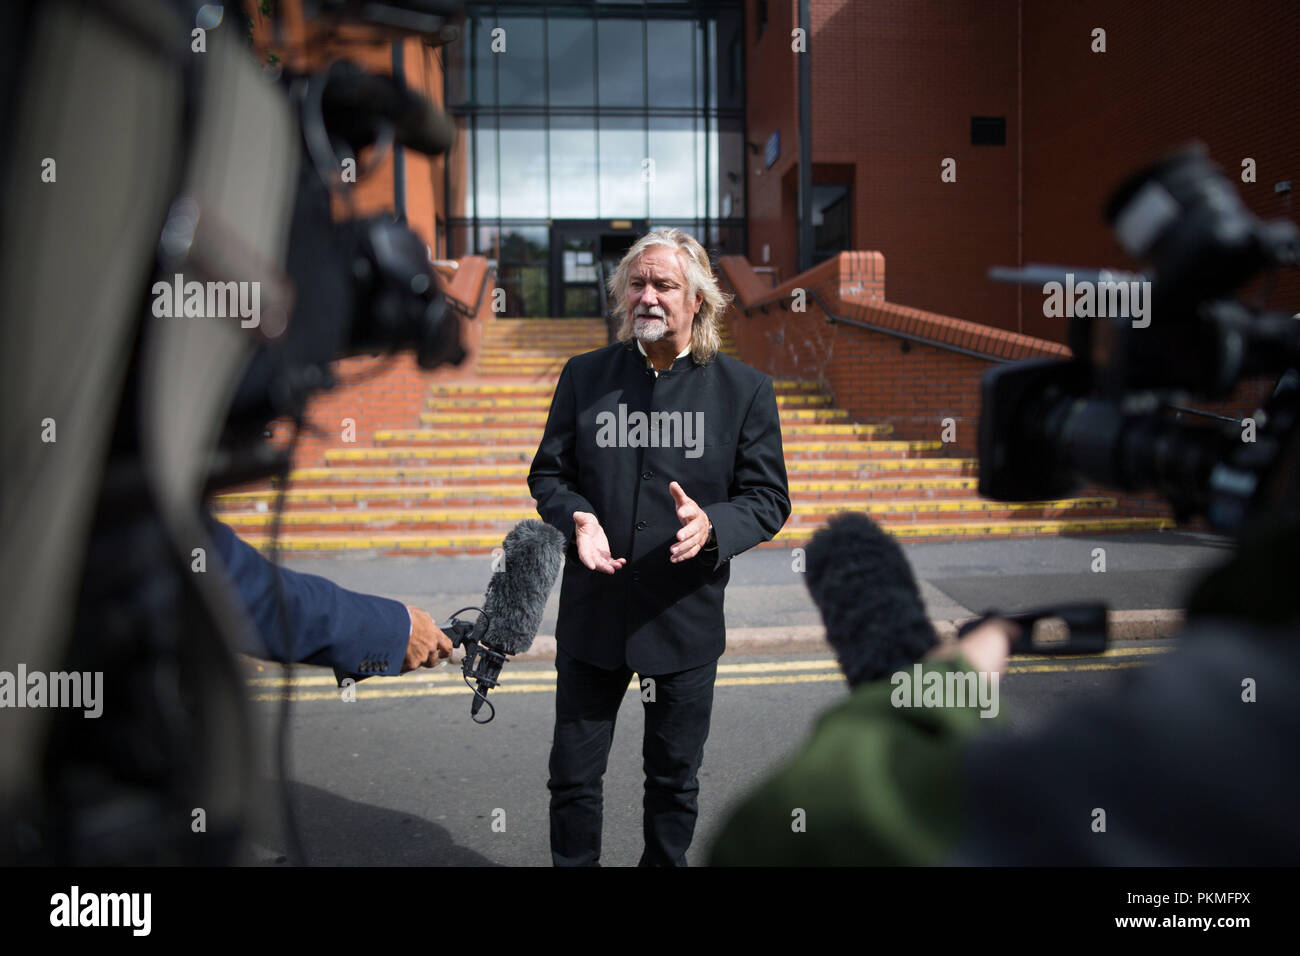 Family spokesperson and PR manager Barry Tomes speaks to the press after lorry driver Gary Gardiner was jailed for two-and-a-half at Leicester Crown Court for frauds committed while collecting charity cash for the son of murdered soldier Lee Rigby. Stock Photo